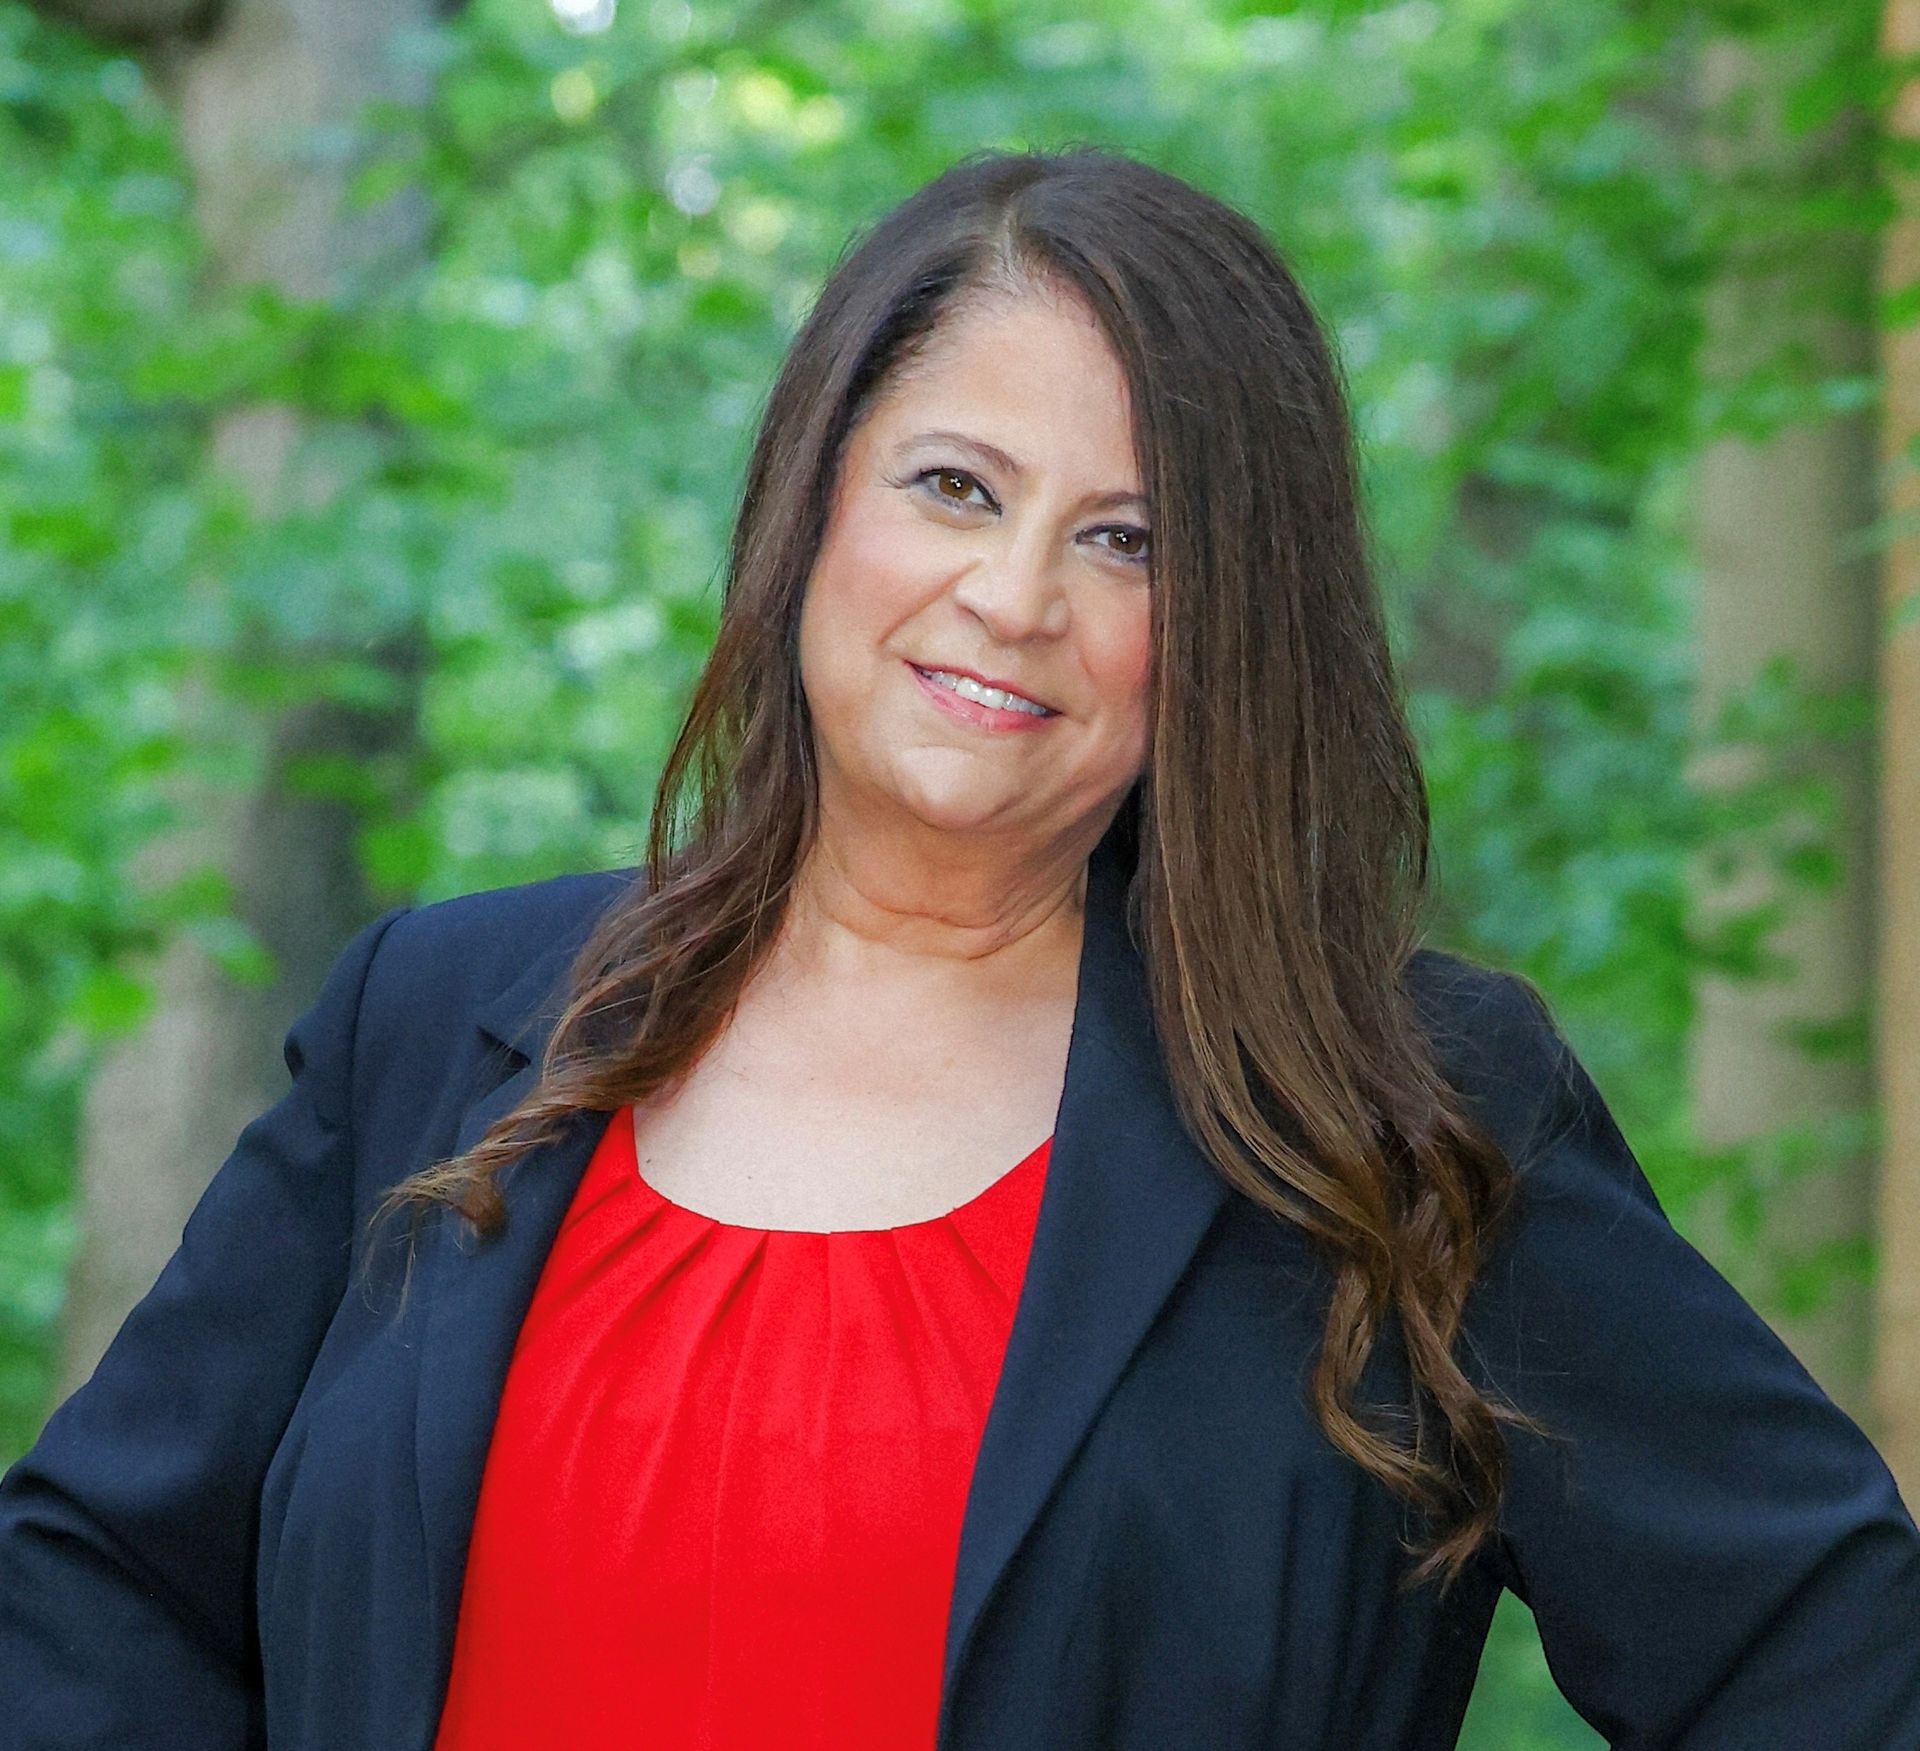 Pamela Price-Lerner wearing a red shirt and a black jacket is standing in front of trees .